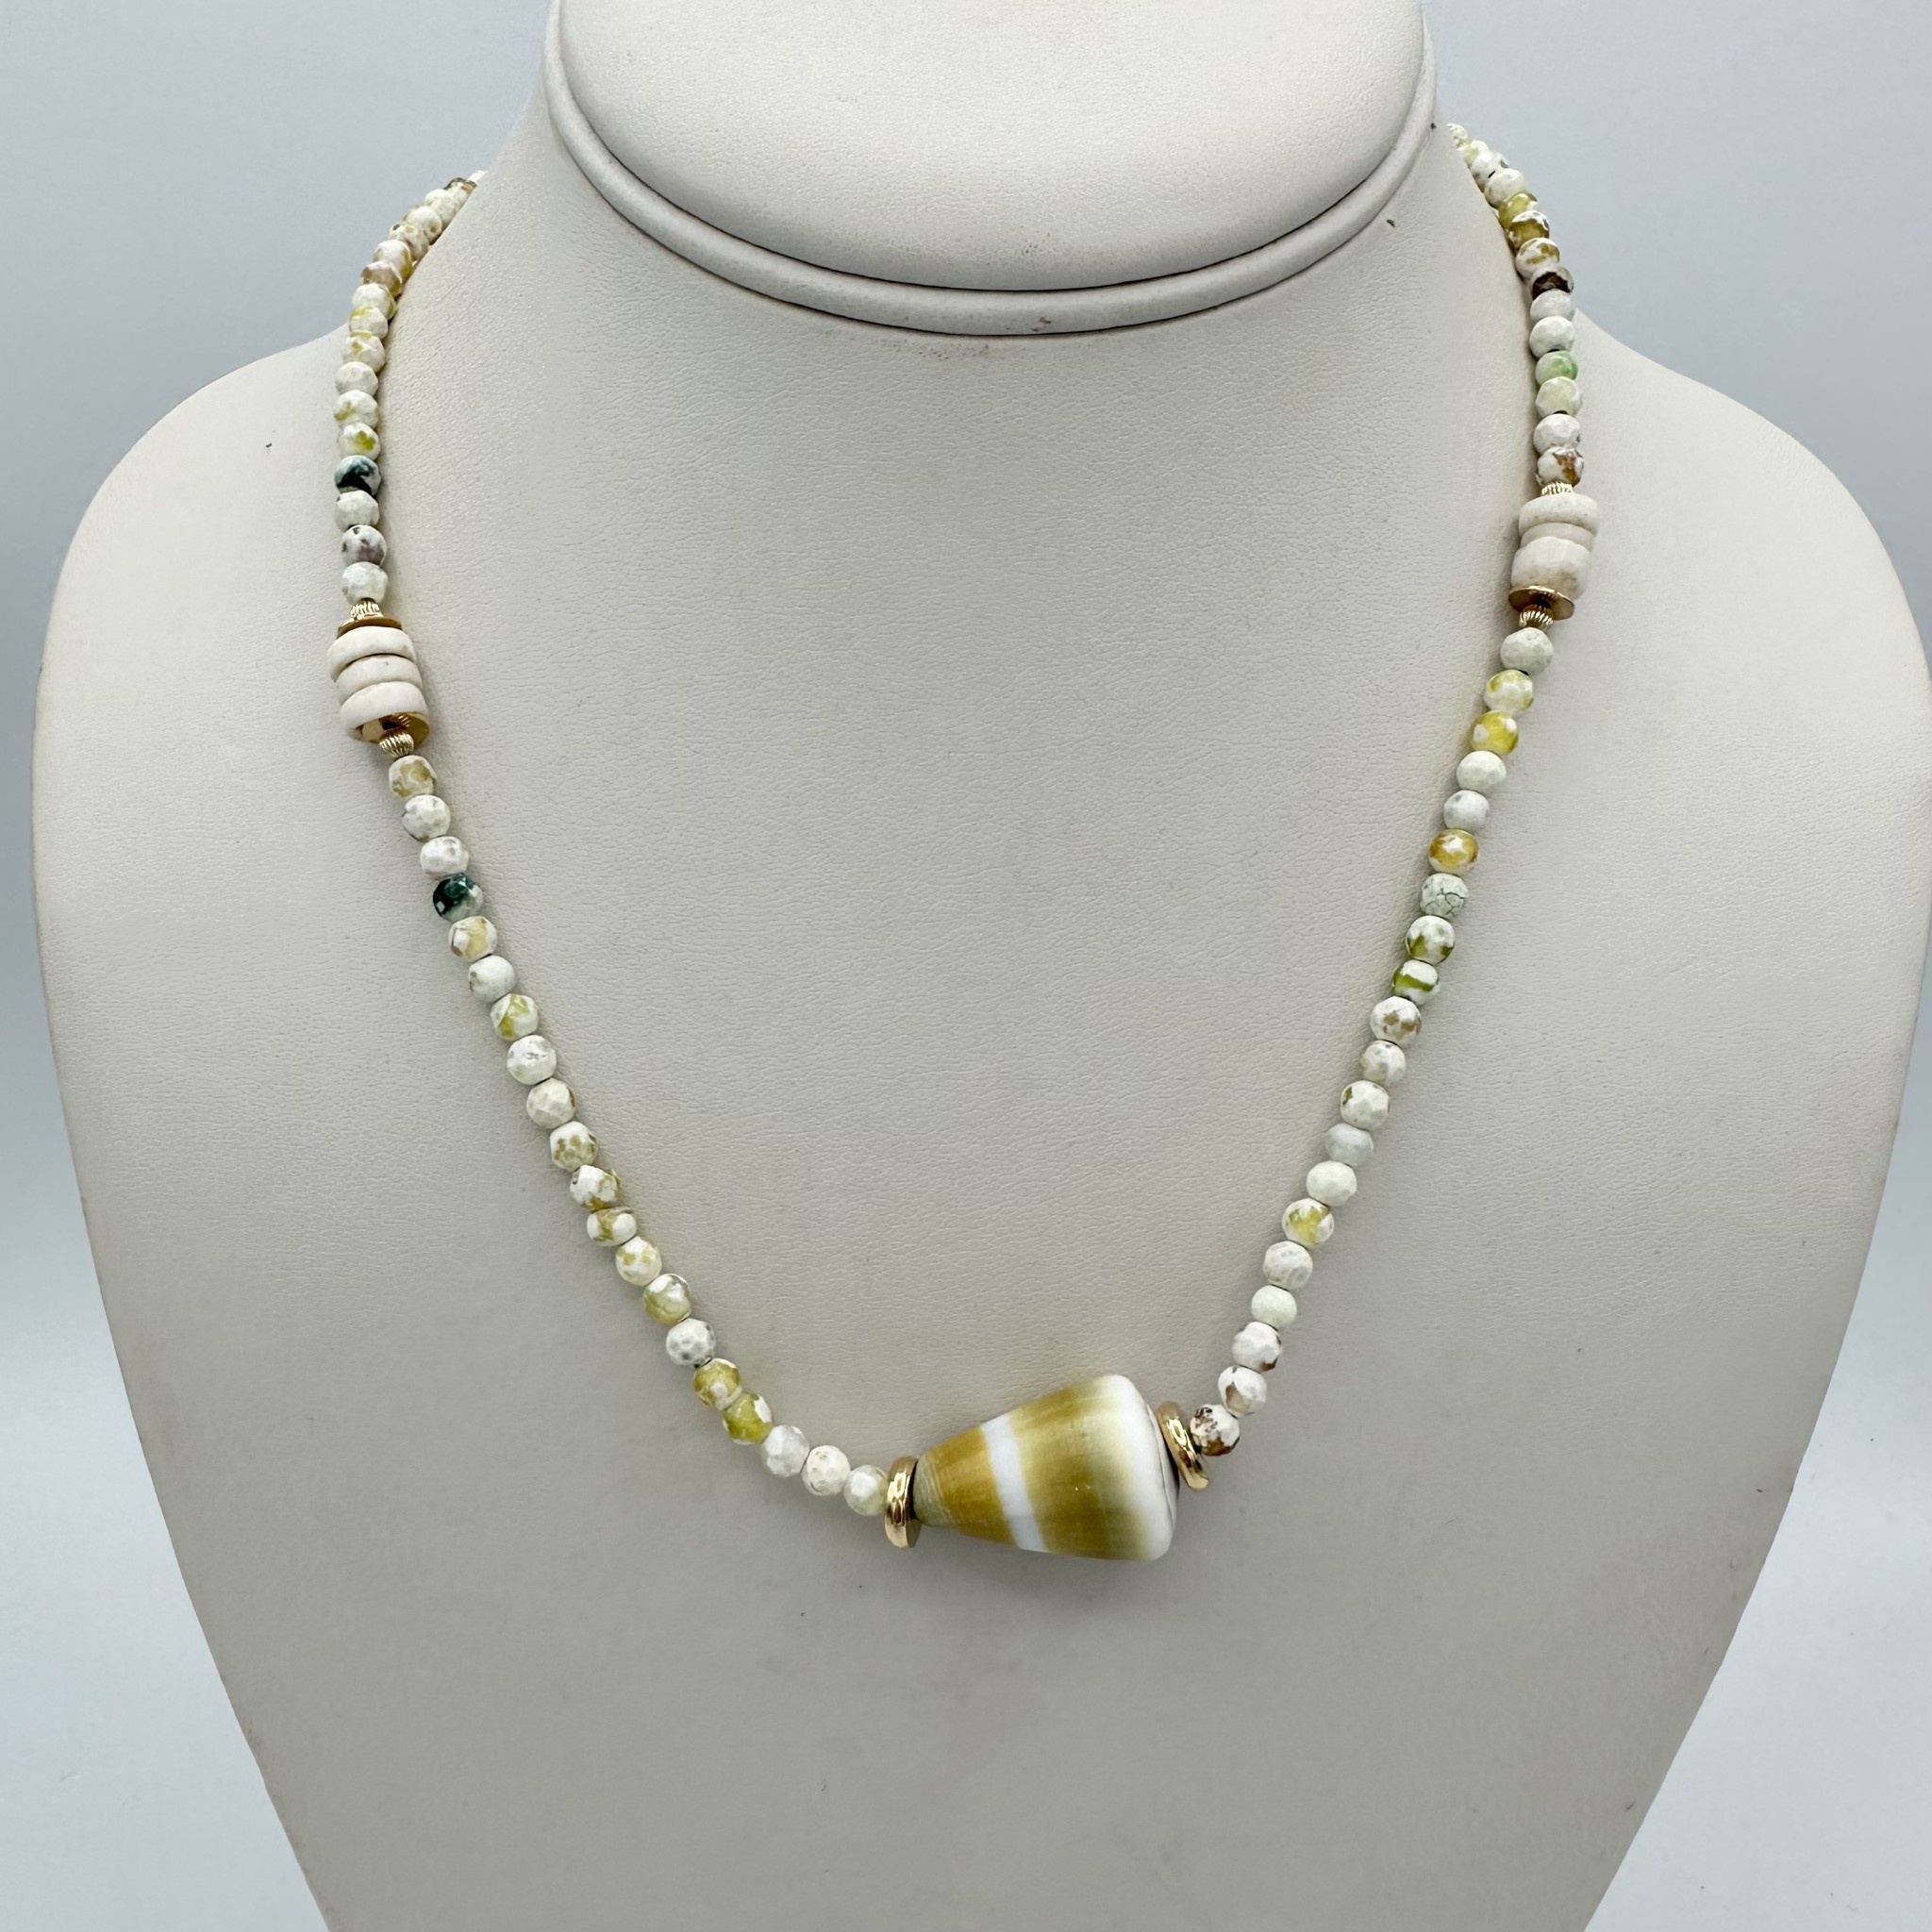 Real Seashell & Freshwater Pearl Beaded Necklace White Shell